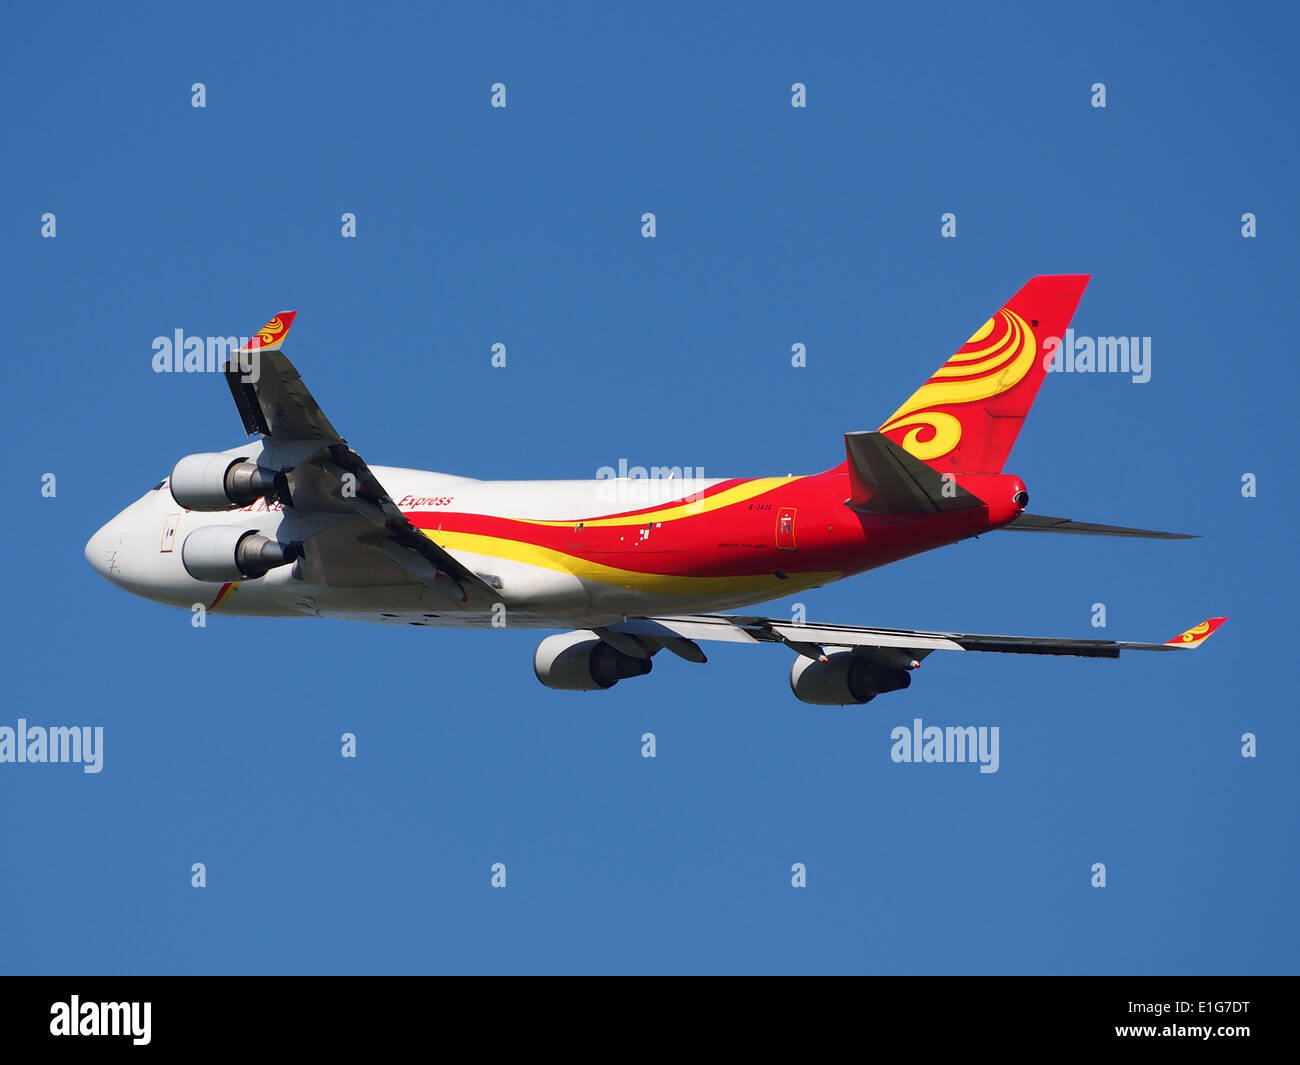 B-2432 Yangtze River Express Boeing 747-481(BDSF) at Schiphol (AMS - EHAM), The Netherlands, 16may2014, pic-7 Stock Photo